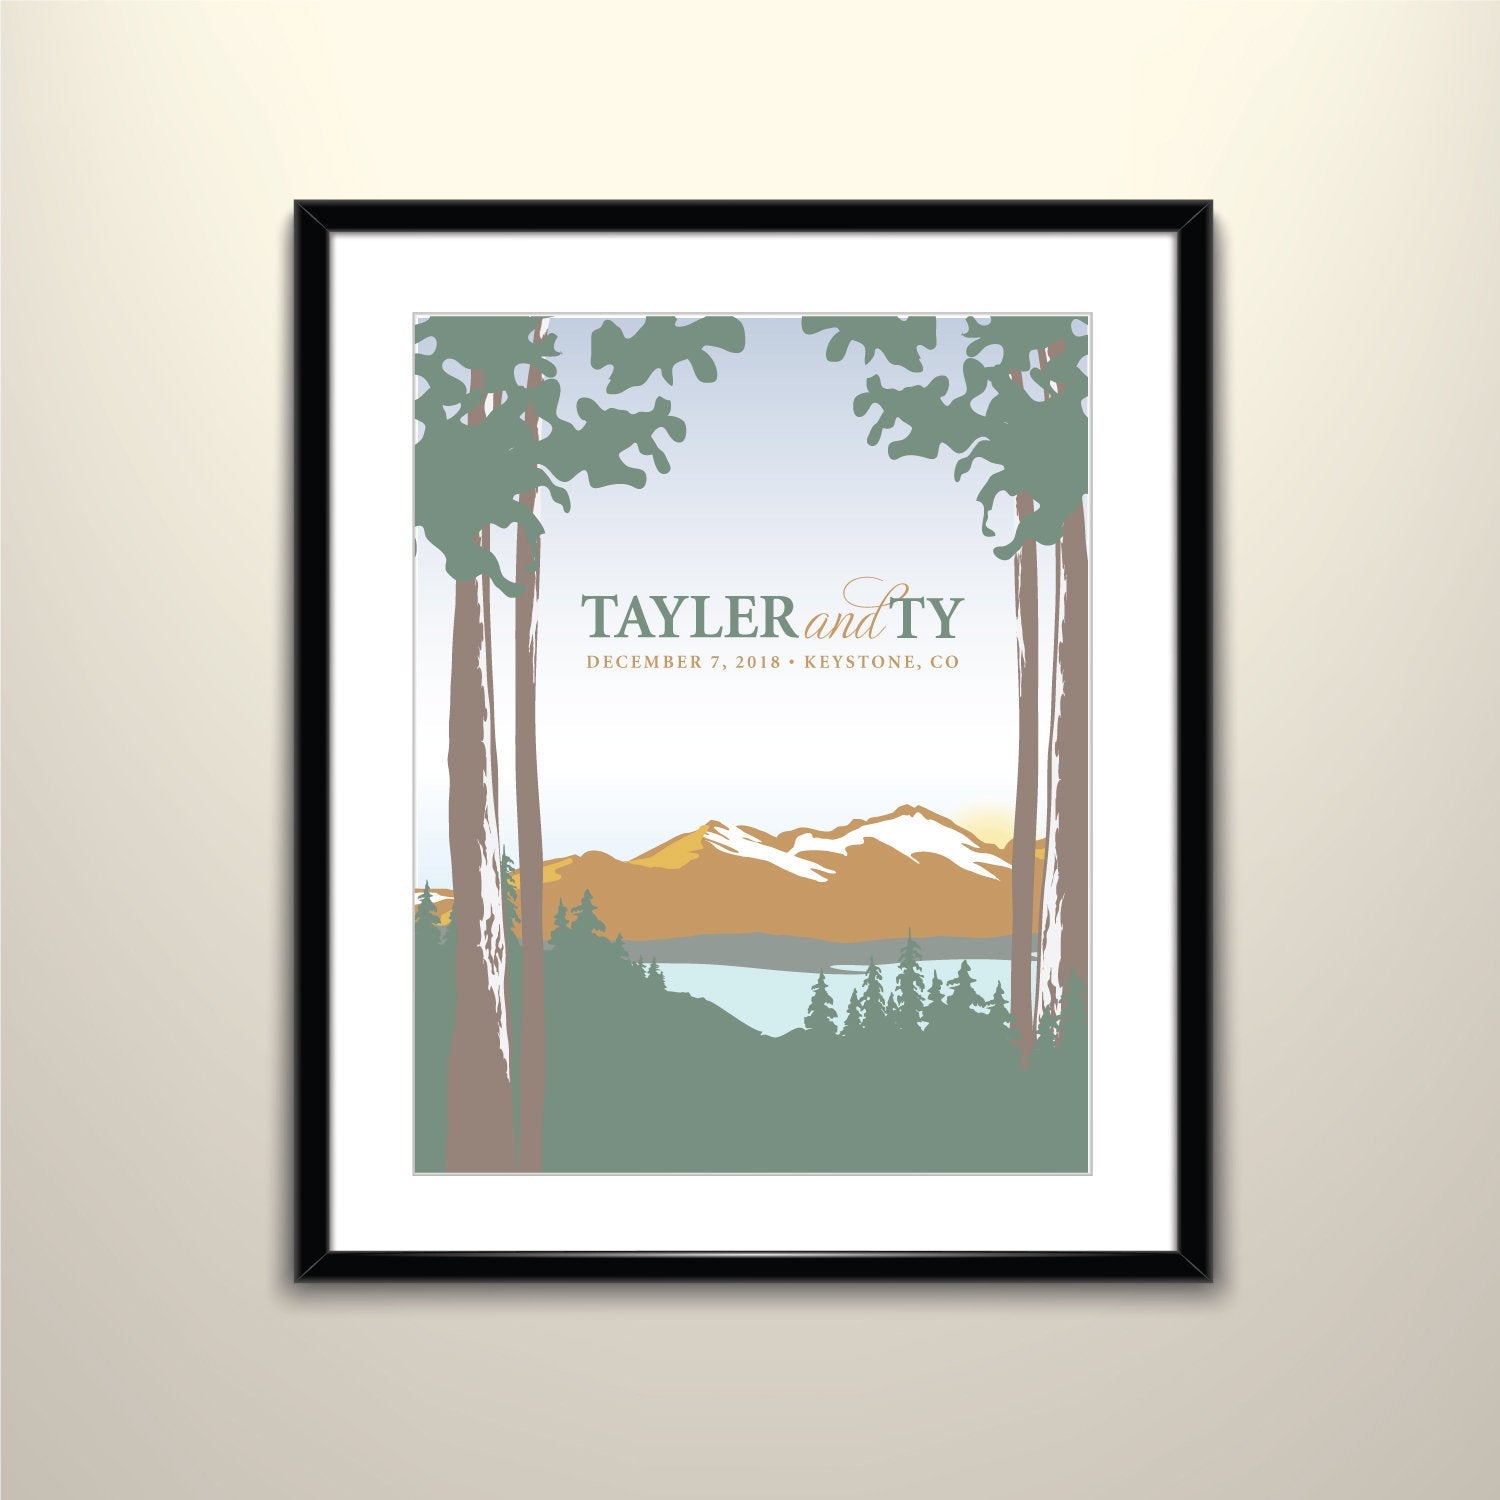 11x14 Colorado Mountain Vintage Travel Wedding Poster personalized with Names and date (frame not included)